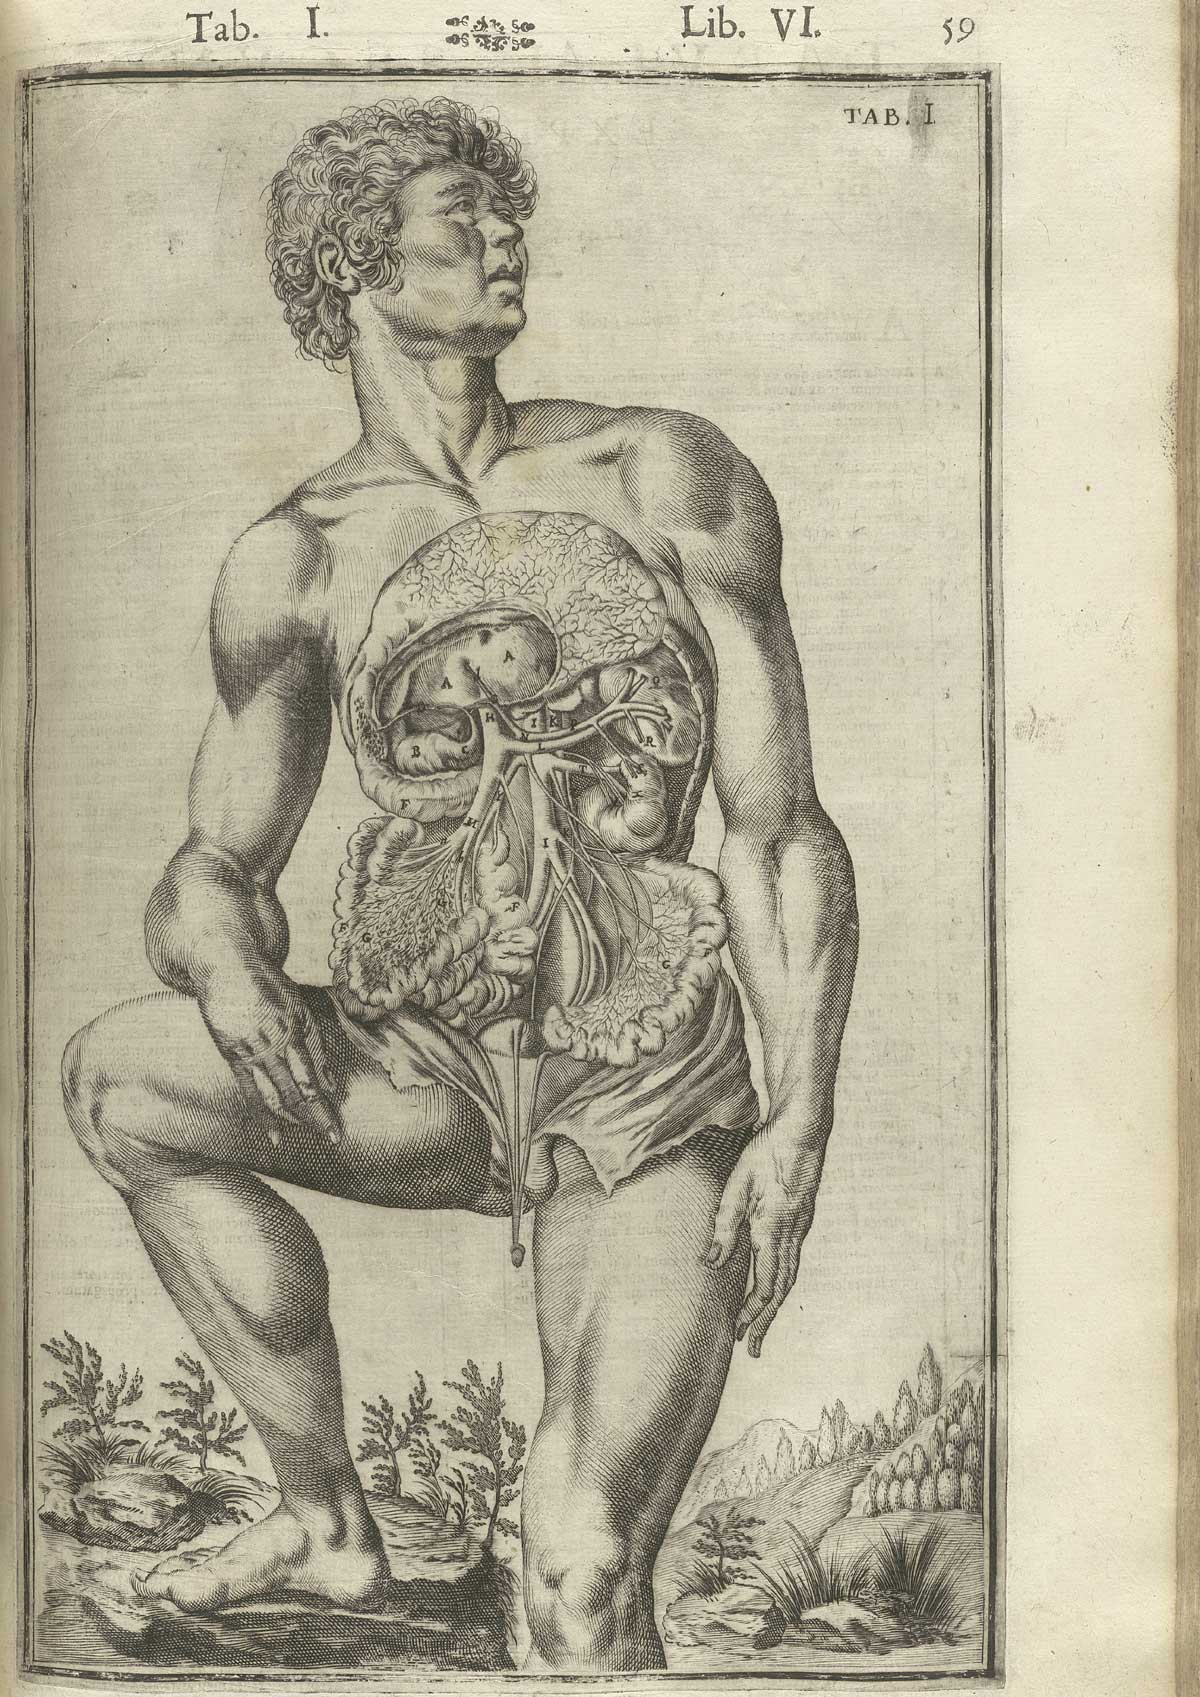 Engraving showing a frontal view of a standing nude male anatomical figure with right foot raised on a tree stump with face turned to the right in a pastoral setting, with his abdomen cut open showing internal organs including the peritoneum, liver, kidneys, spleen, bladder, and intestines exposed in detail; from Adriaan van de Spiegel and Giulio Cassieri’s De humani corporis fabrica libri decem, Venice, 1627, NLM call no. WZ 250 S755dh 1627.